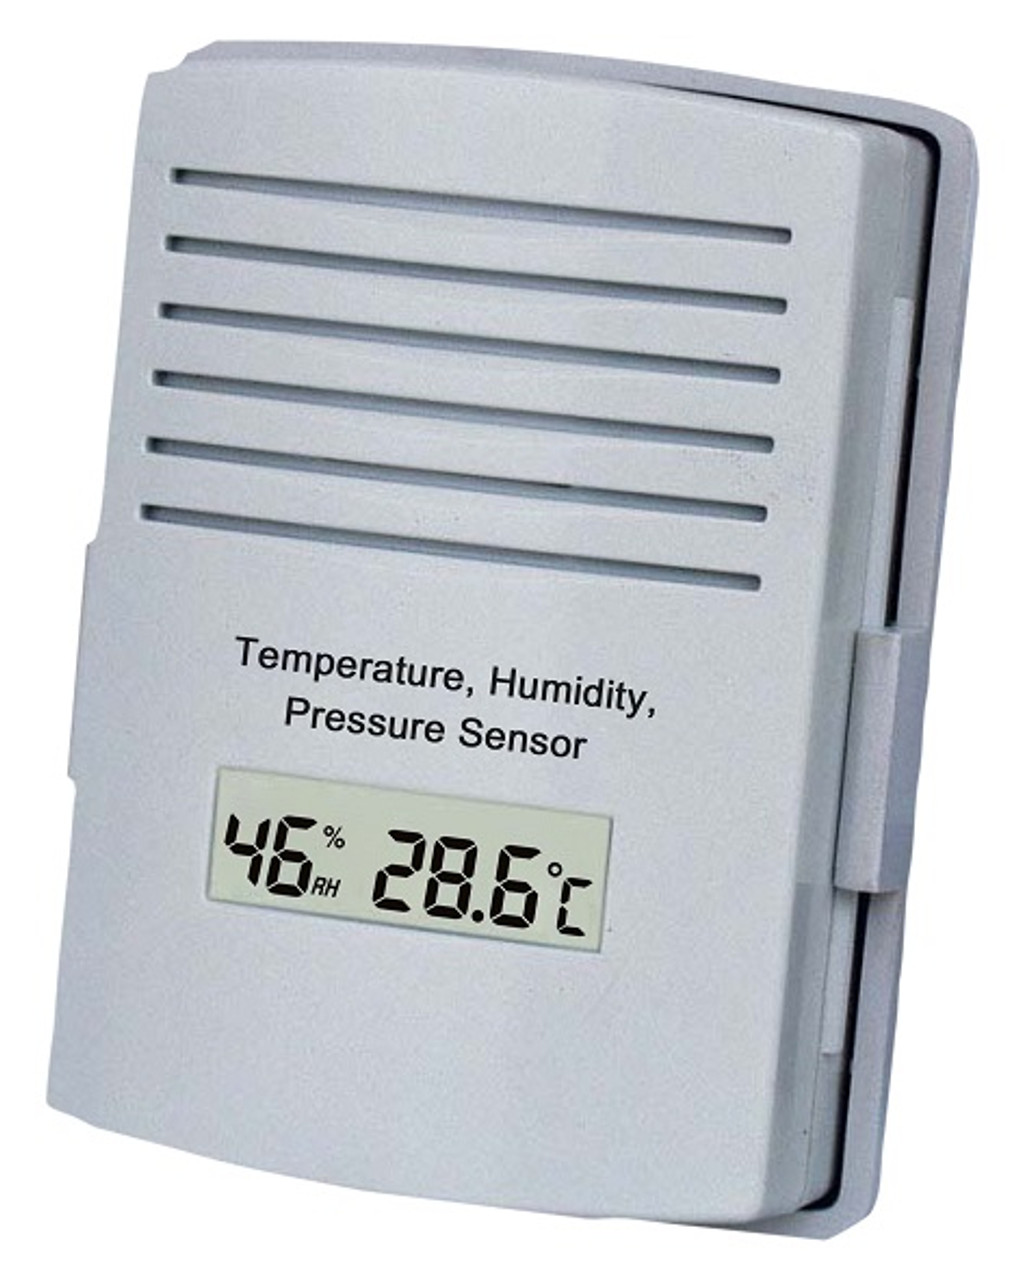 Aercus Instruments WeatherSleuth - Professional IP Weather Station with Direct Real-time Internet Monitoring